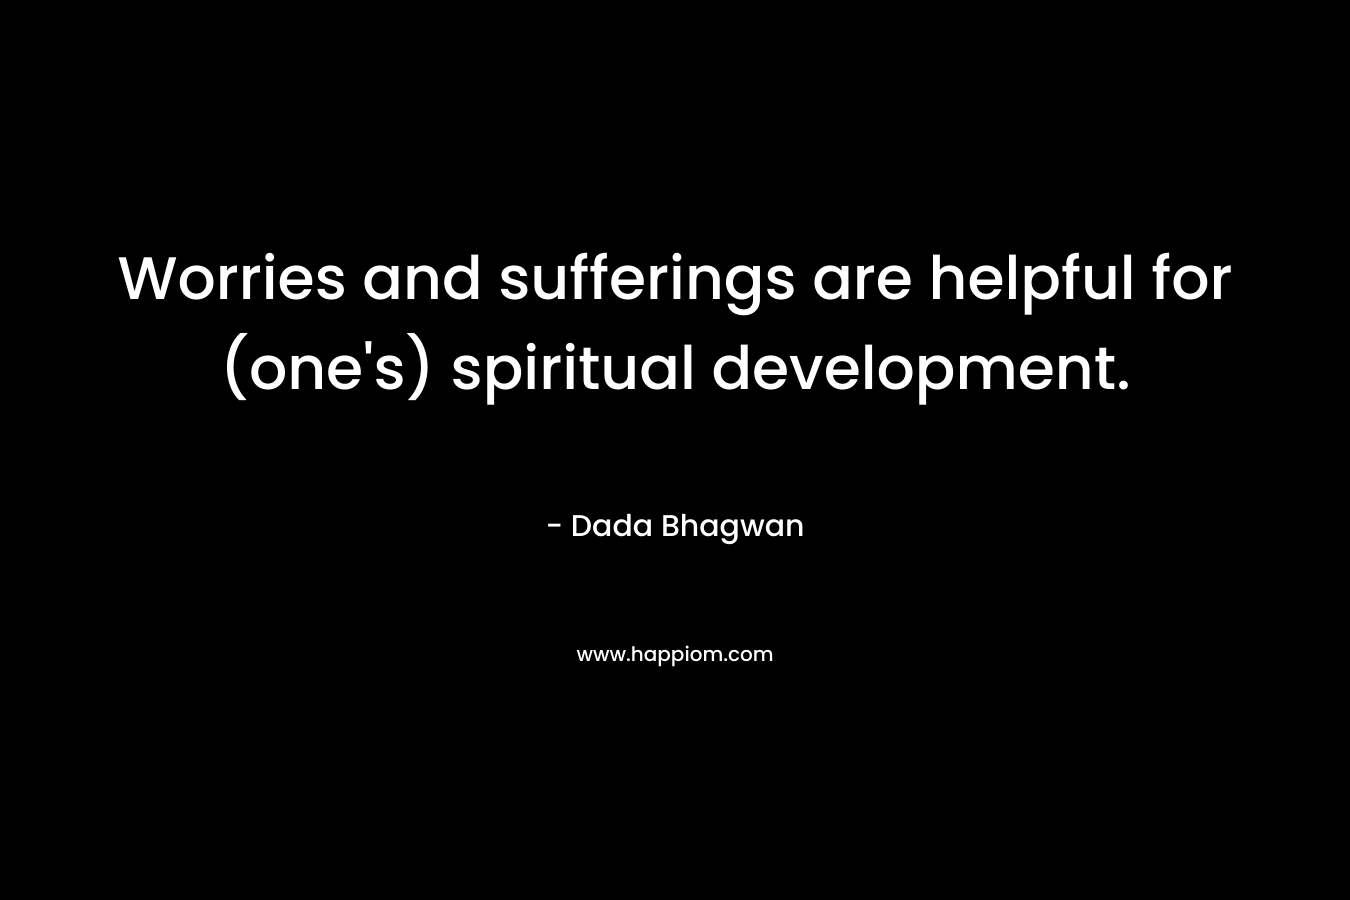 Worries and sufferings are helpful for (one's) spiritual development.